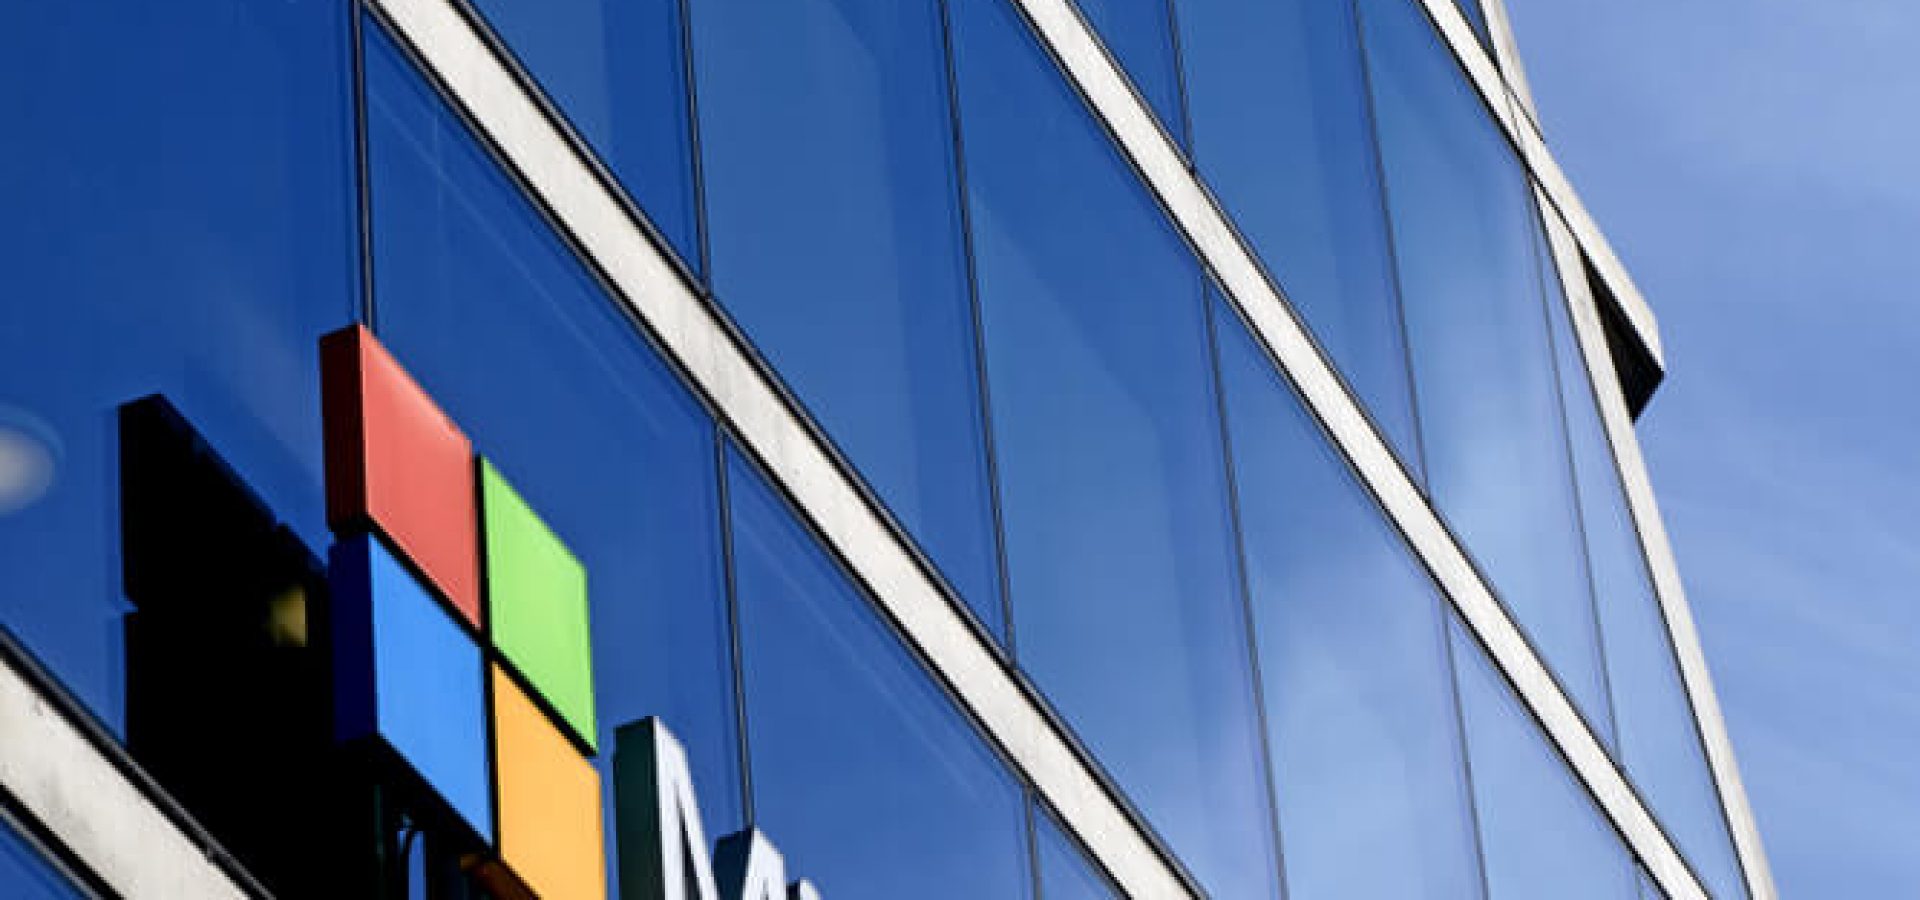 Microsoft logo is seen on the new office building.